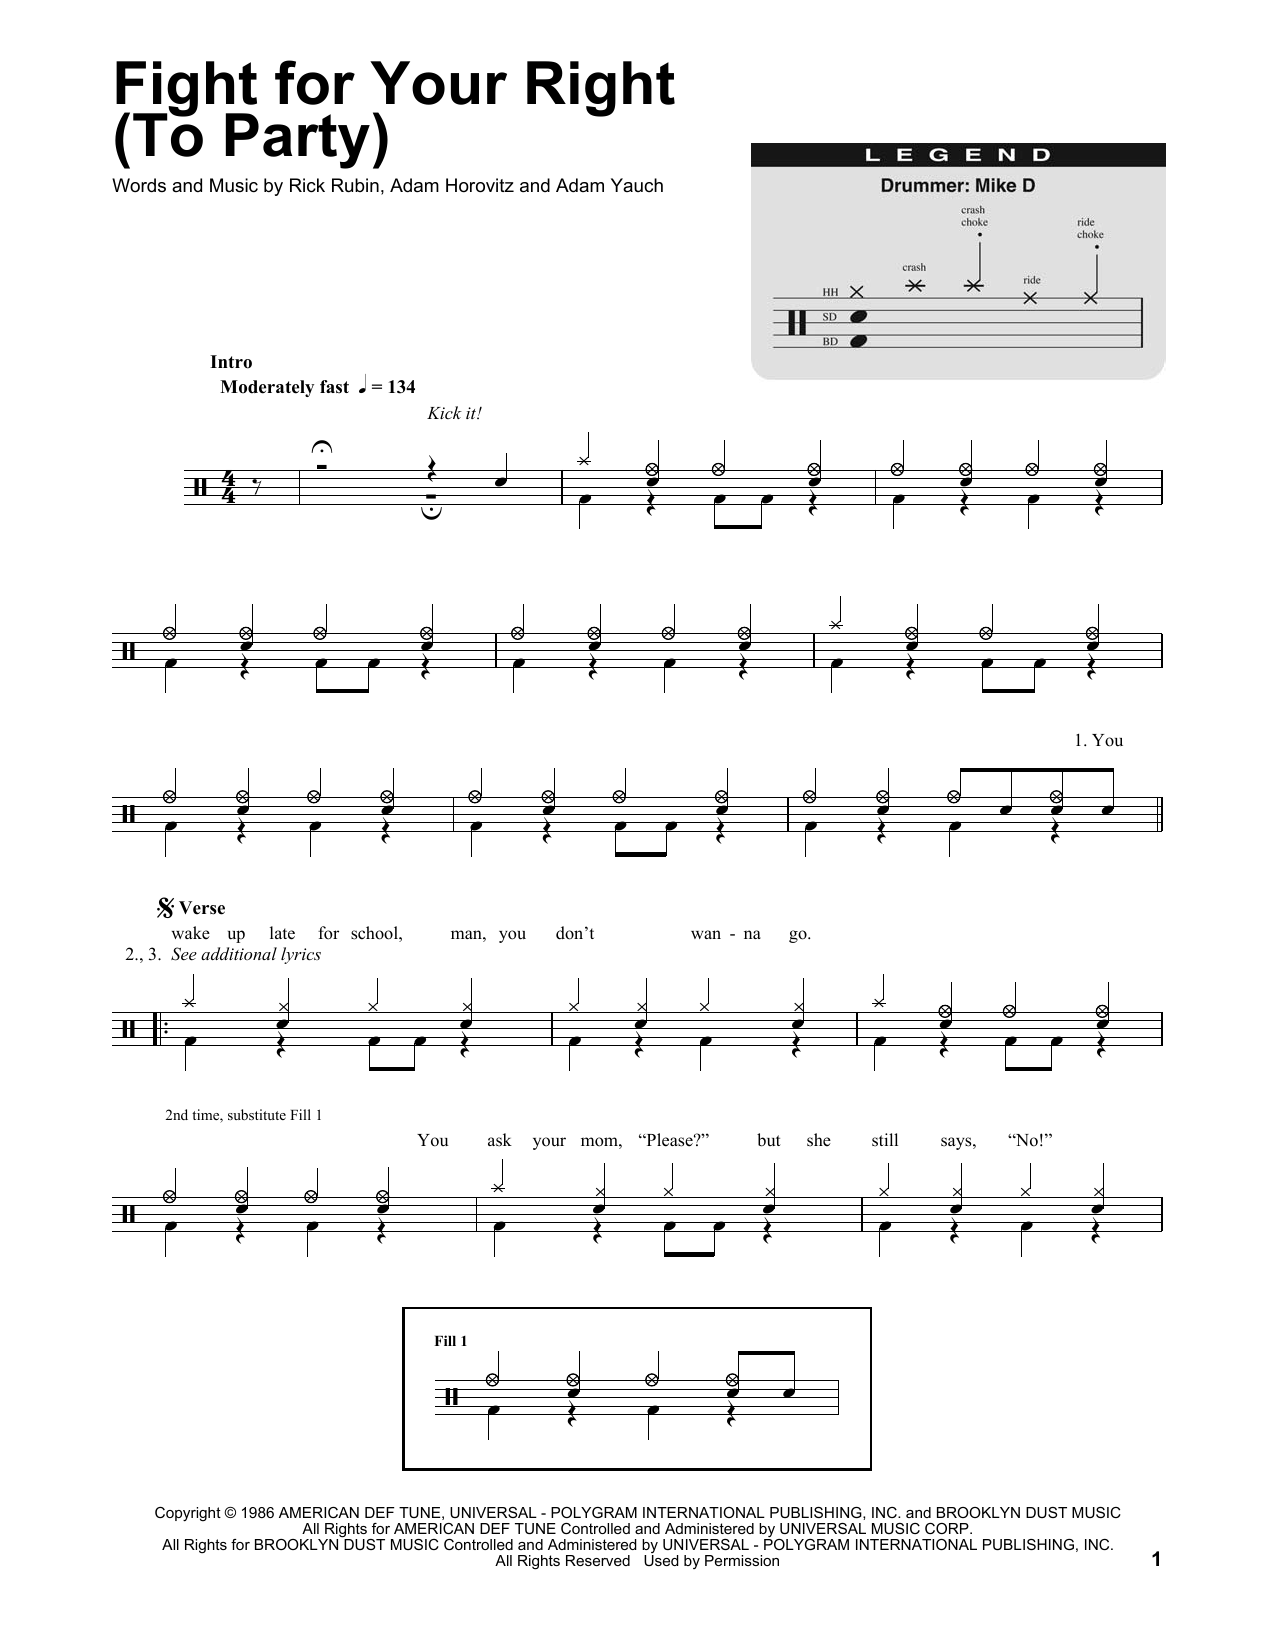 Download Beastie Boys Fight For Your Right (To Party) Sheet Music